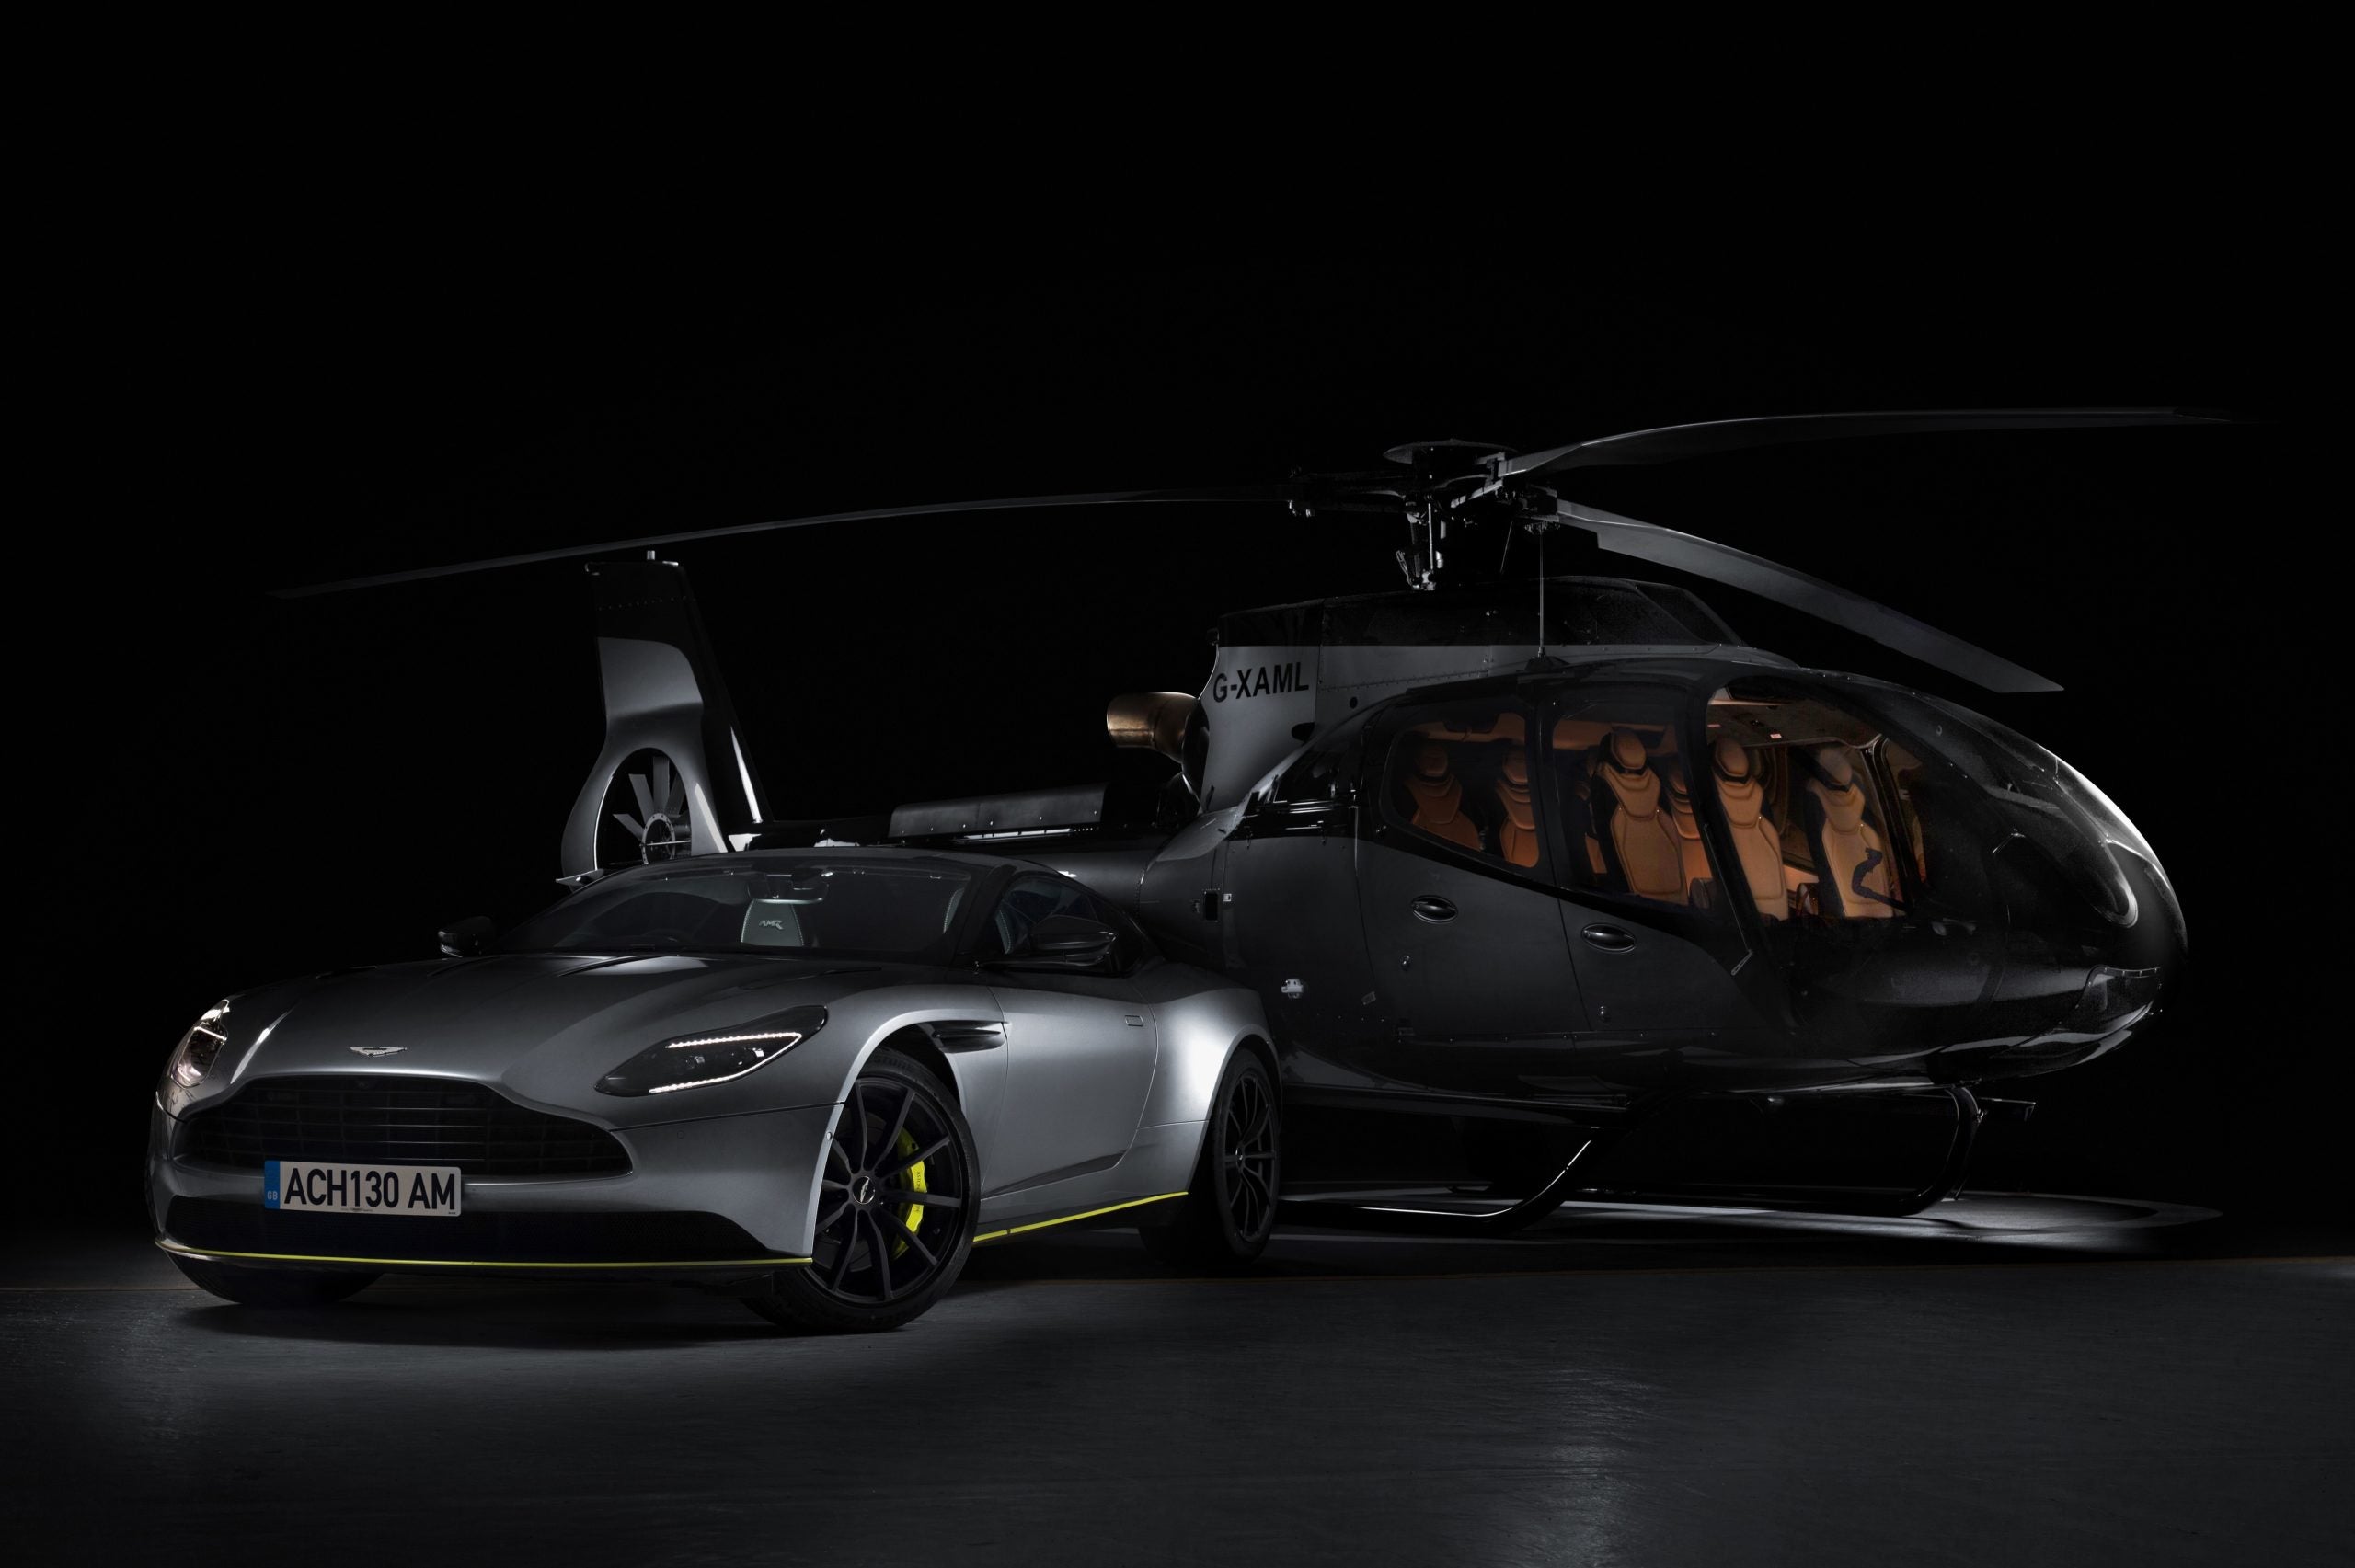 Airbus Reveals Beautiful Aston Martin ACH130 Helicopter